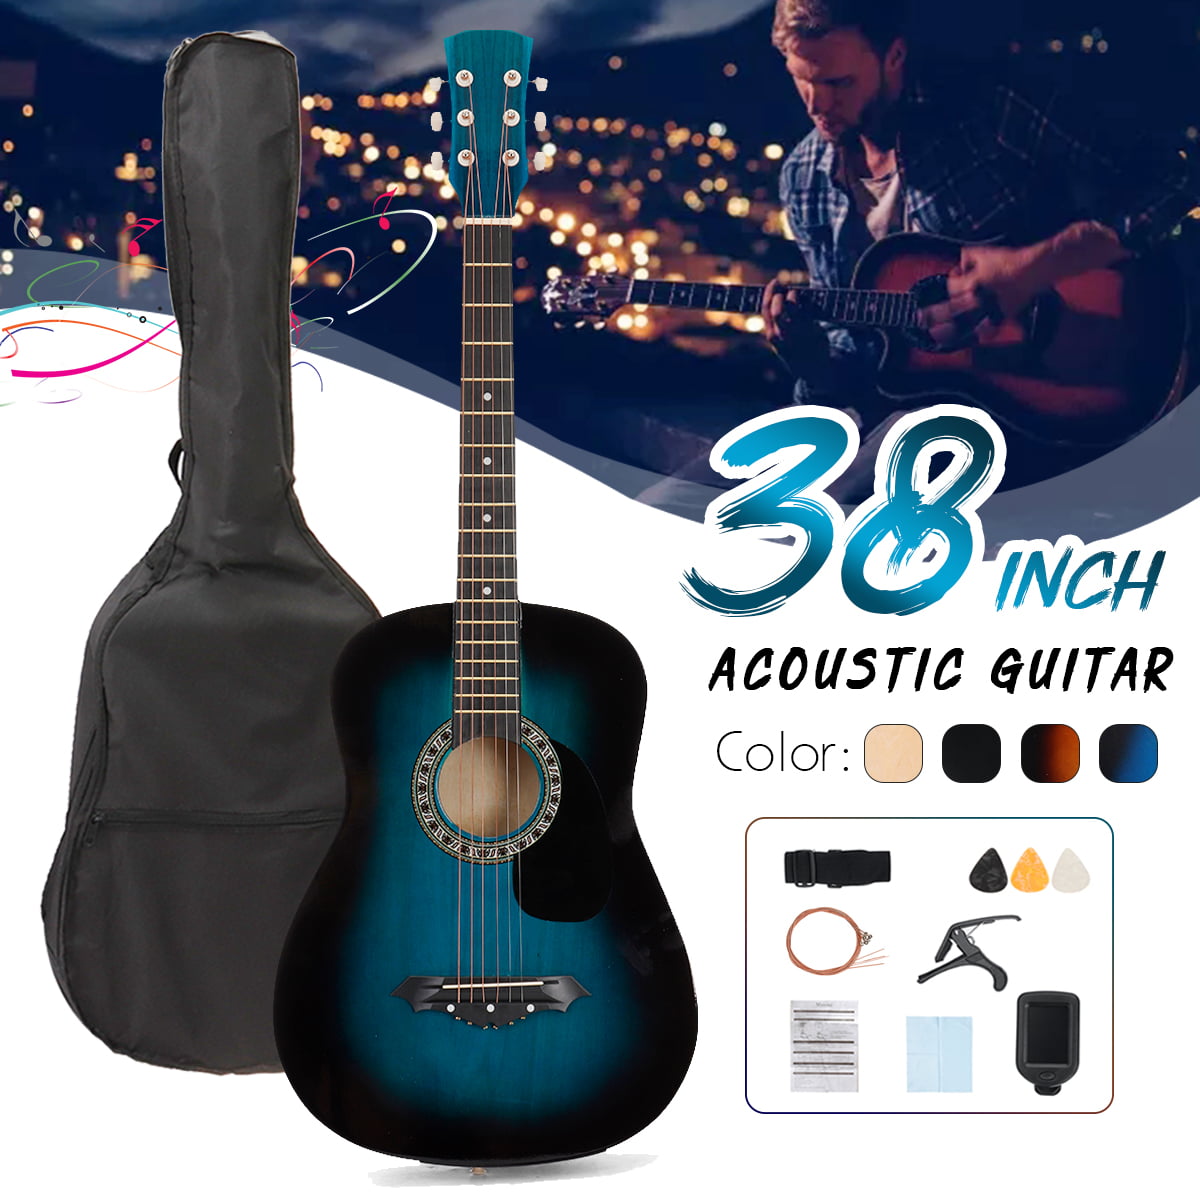 Beginner Acoustic Classical Guitar with Strings 38 inch Acoustic Guitar Musical Instrument Set Tuner Include Tuner Towel Carrying Bag String Thumb Protector Capo